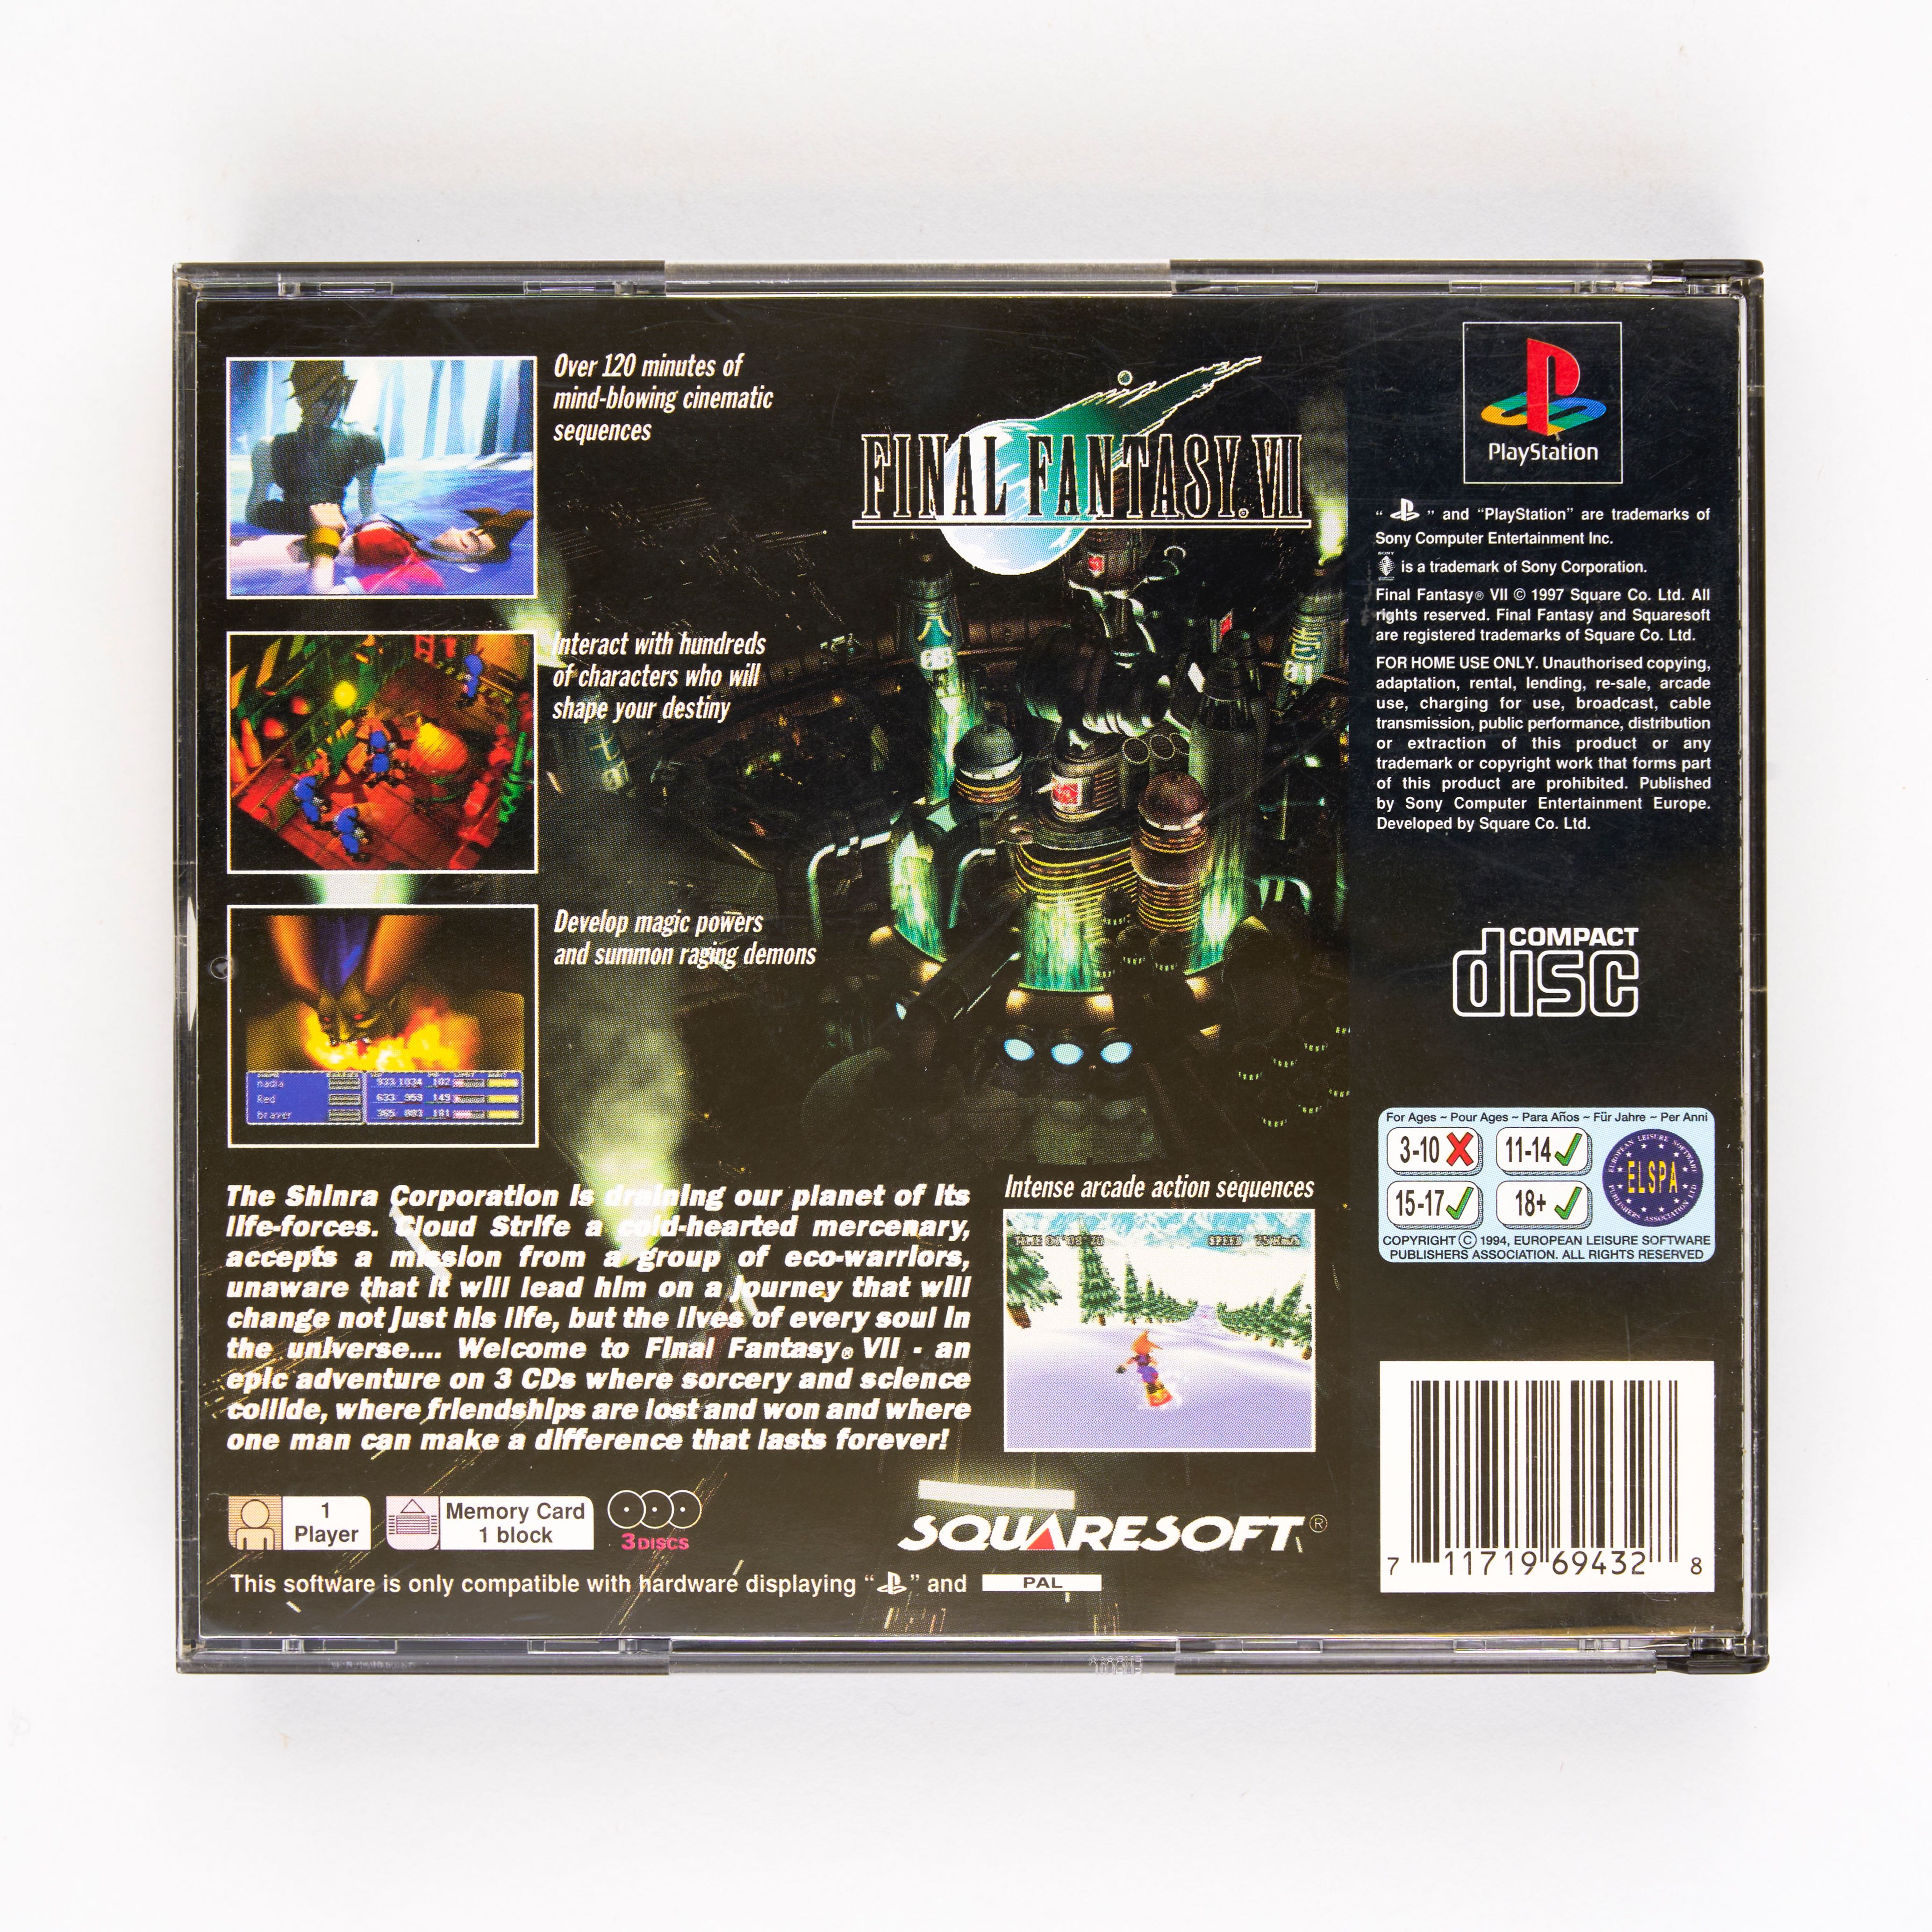 Sony - Final Fantasy VII PAL - Playstation - Complete In Box - Image 2 of 2